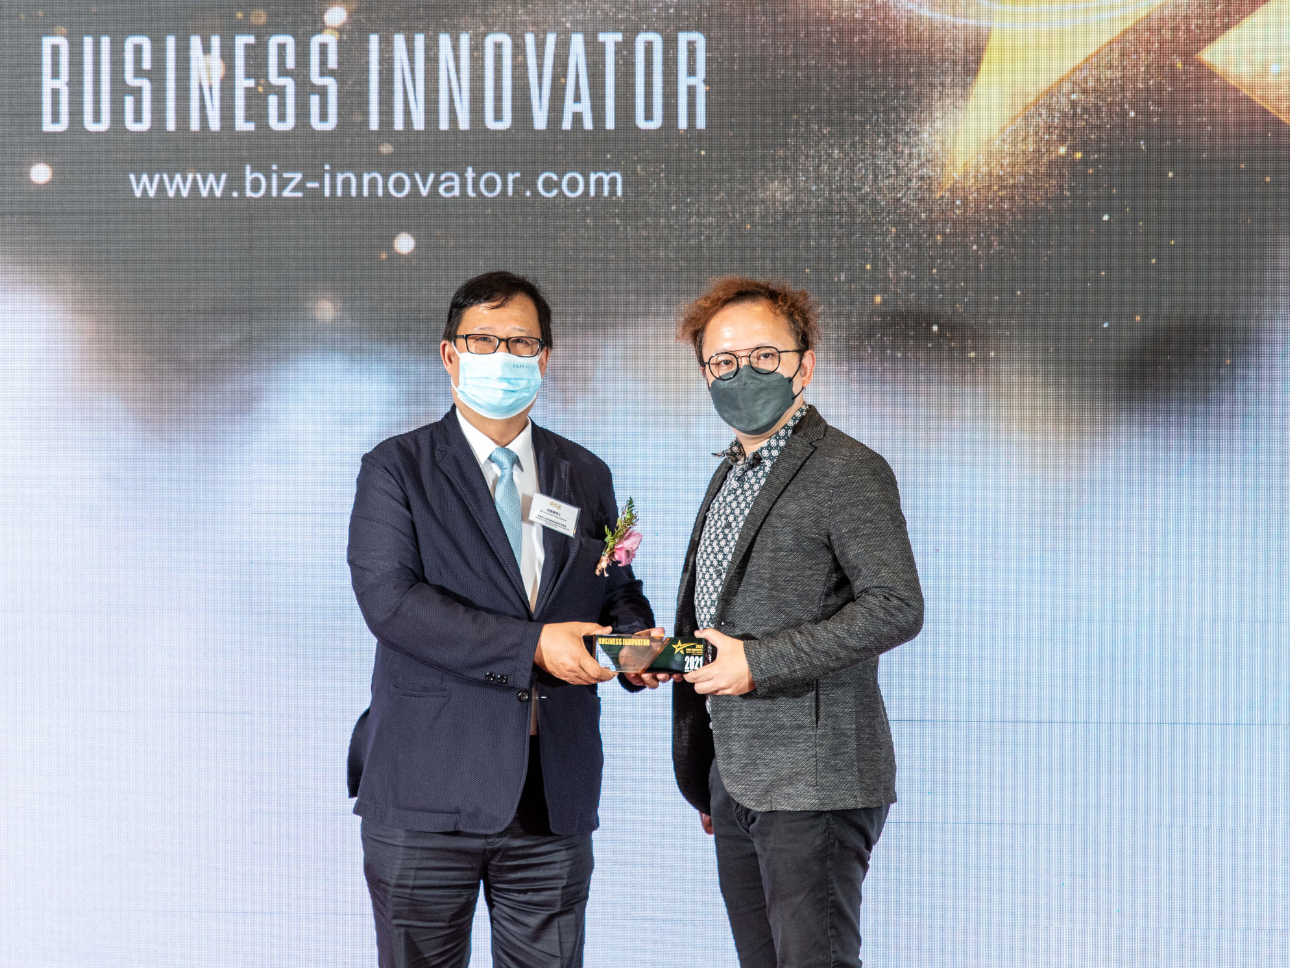 iClick Scooped the “Best Marketing Technology Solution of the Year” at Business Innovator’s 2021 Most Innovative Solution Award!